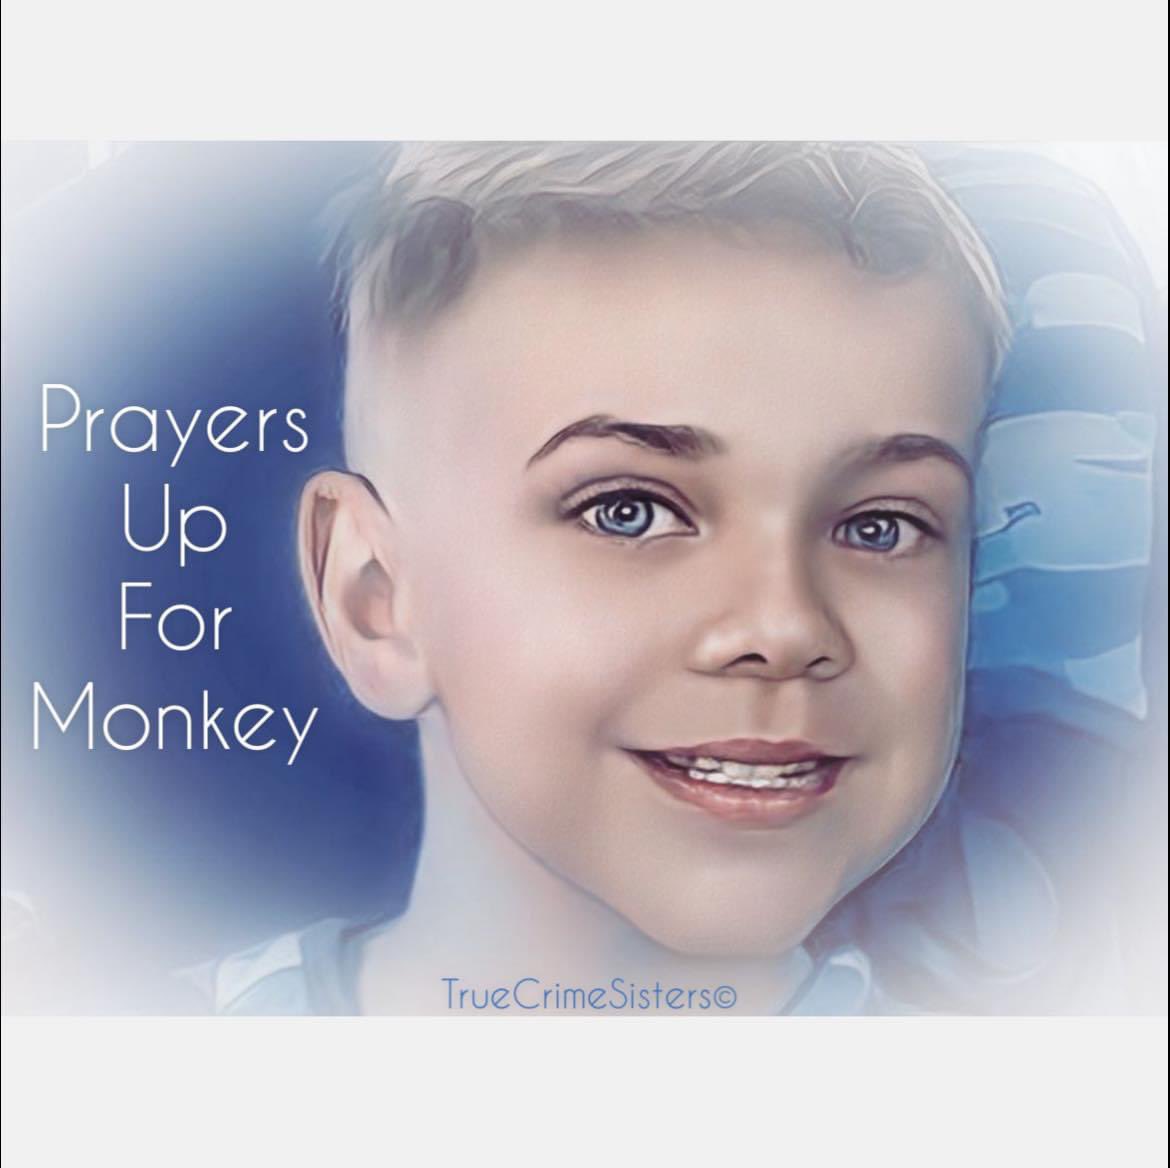 #SarahWondra due in court today & tomorrow. 🚨

JUSTICE FOR MONKEY 🙏💙
#BringMonkeyHome #MissingChild #MichaelVaughan